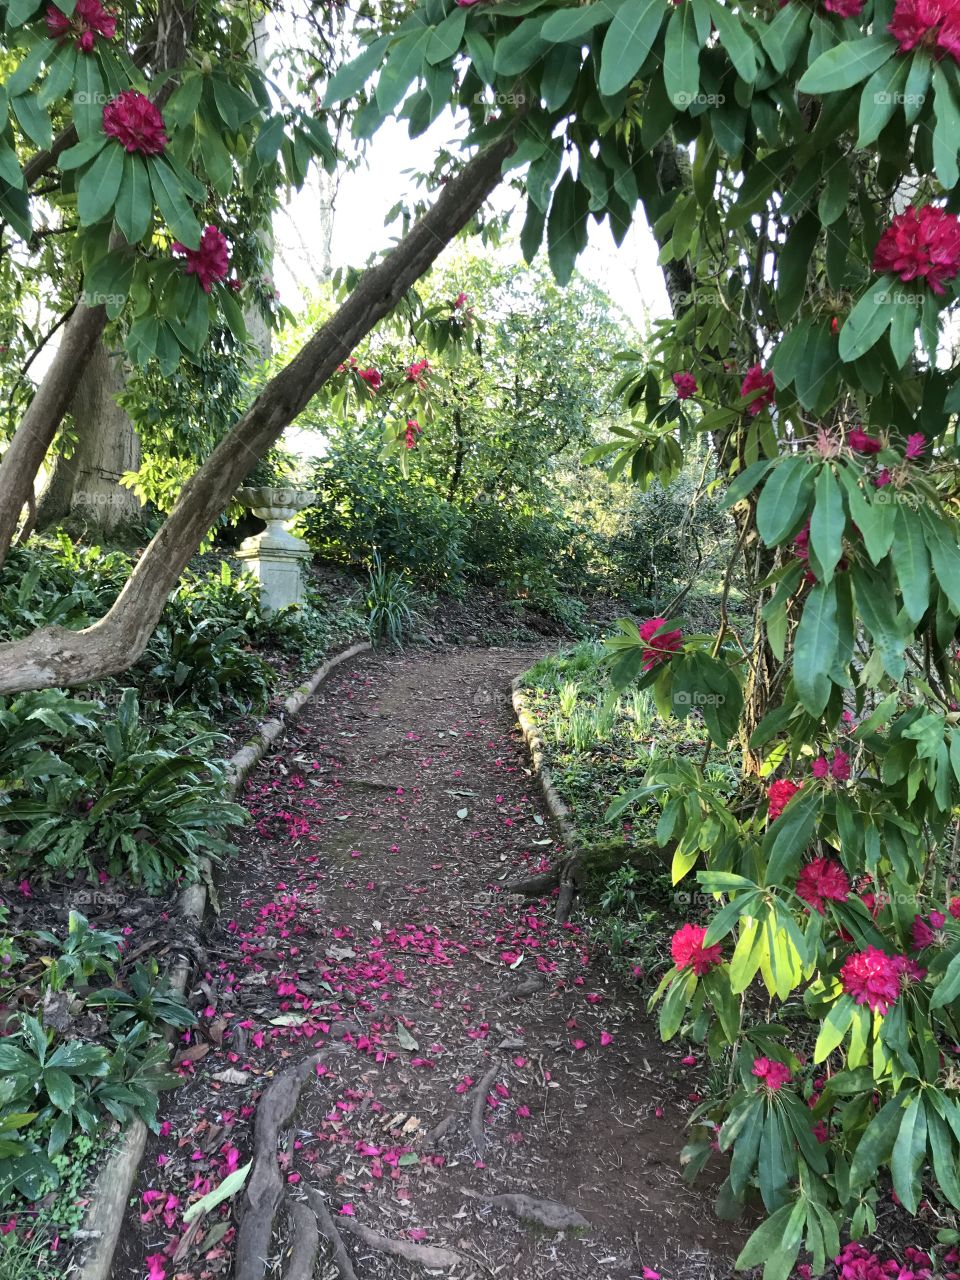 The crimson red flowers light up this garden path.